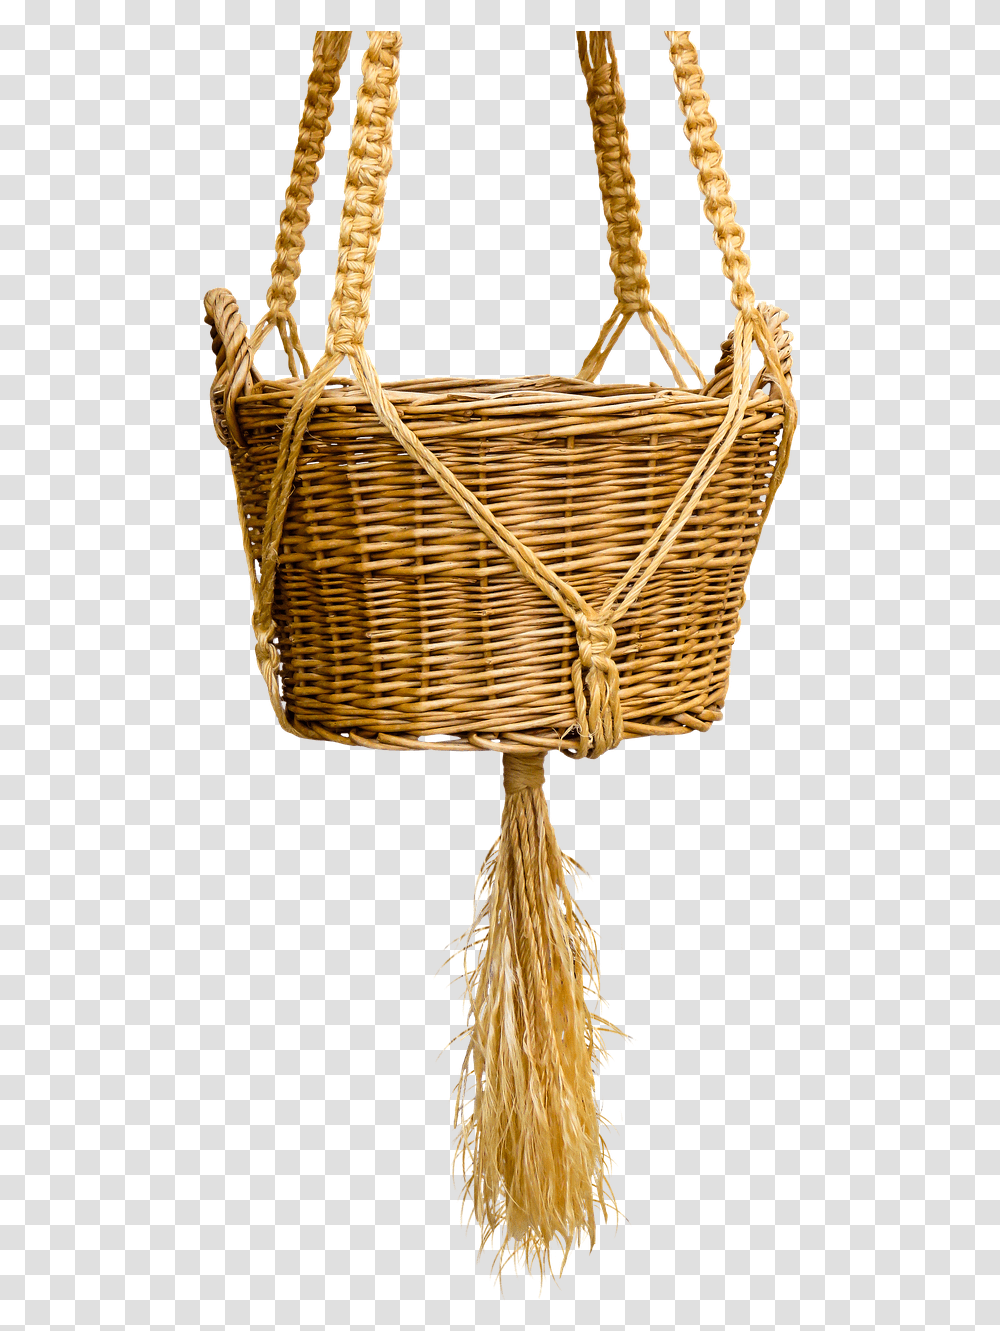 Basket Wicker Basket Isolated Kitten In The Basket Cat, Lamp, Shopping Basket, Woven Transparent Png